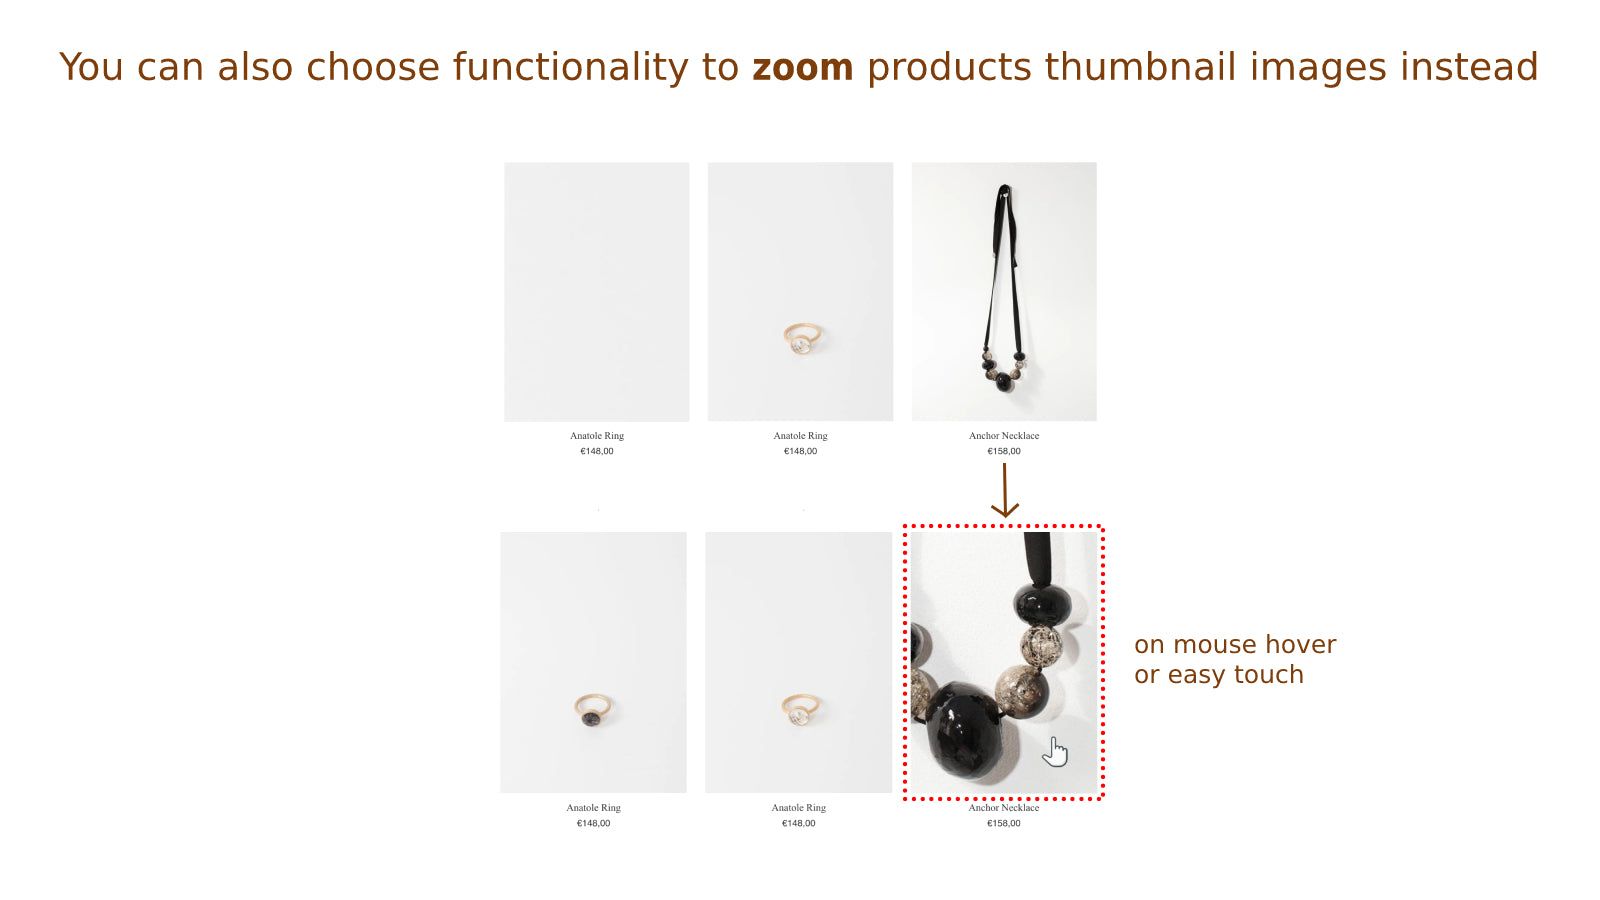 Display zoom of product thumbnail image on mouse hover or touch